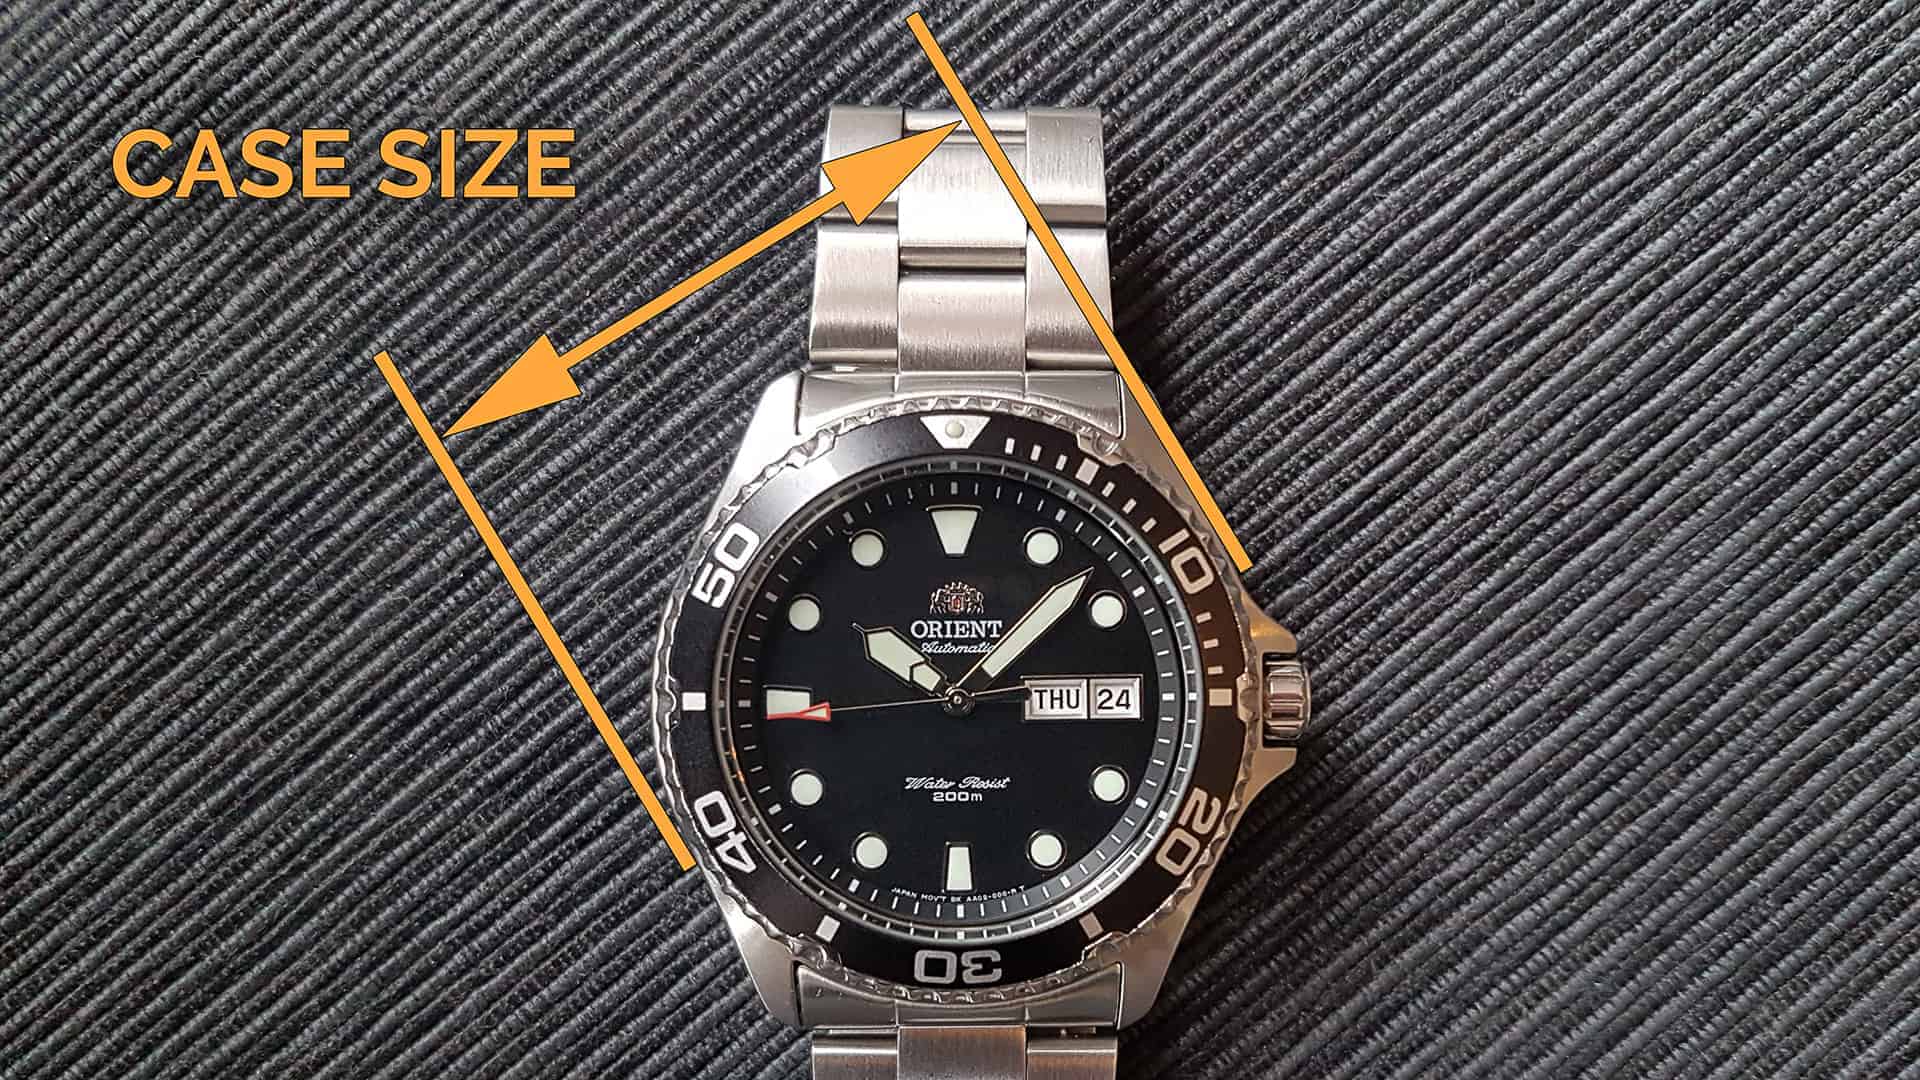 The Ultimate Watch Size Guide + Watch Size Calculator-1